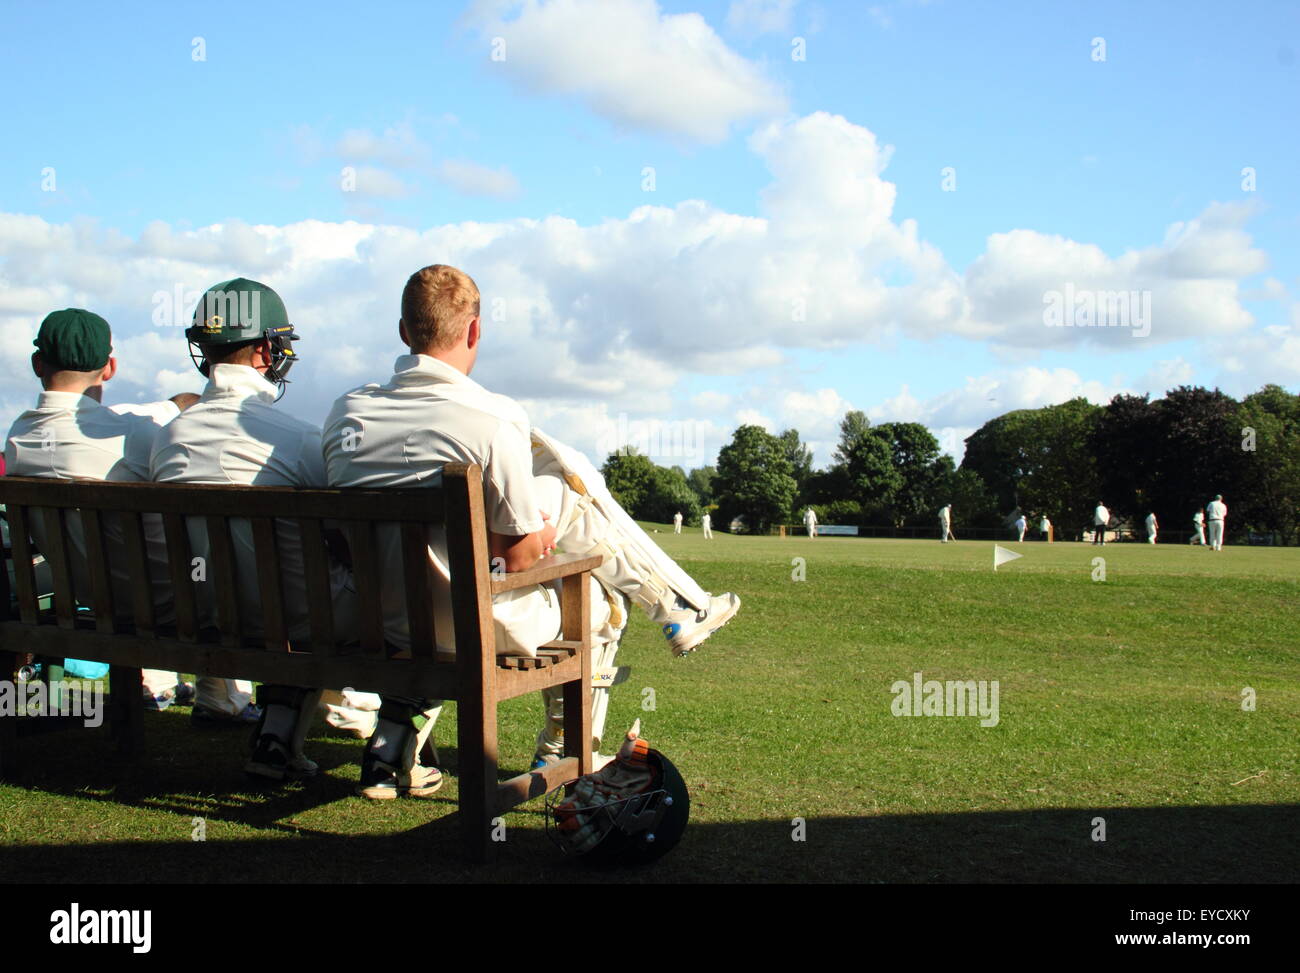 Cricketers watch a  Wentworth Cricket Club match at Wentworth village near Roterham, Yorkshire, England UK - Stock Photo